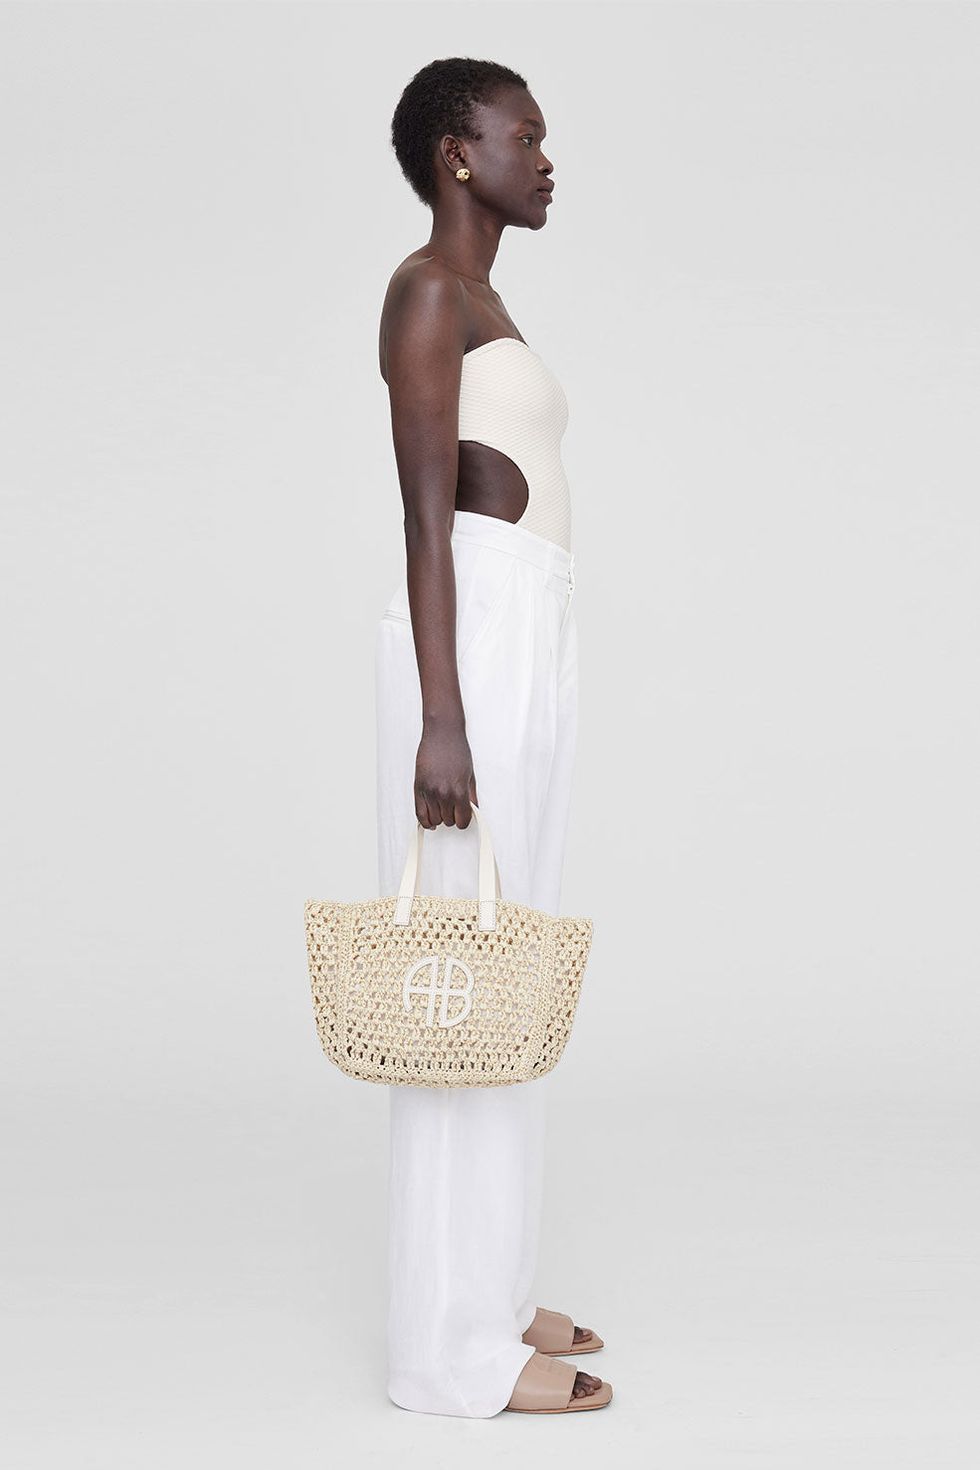 The Best Basket Bags to Shop in 2023